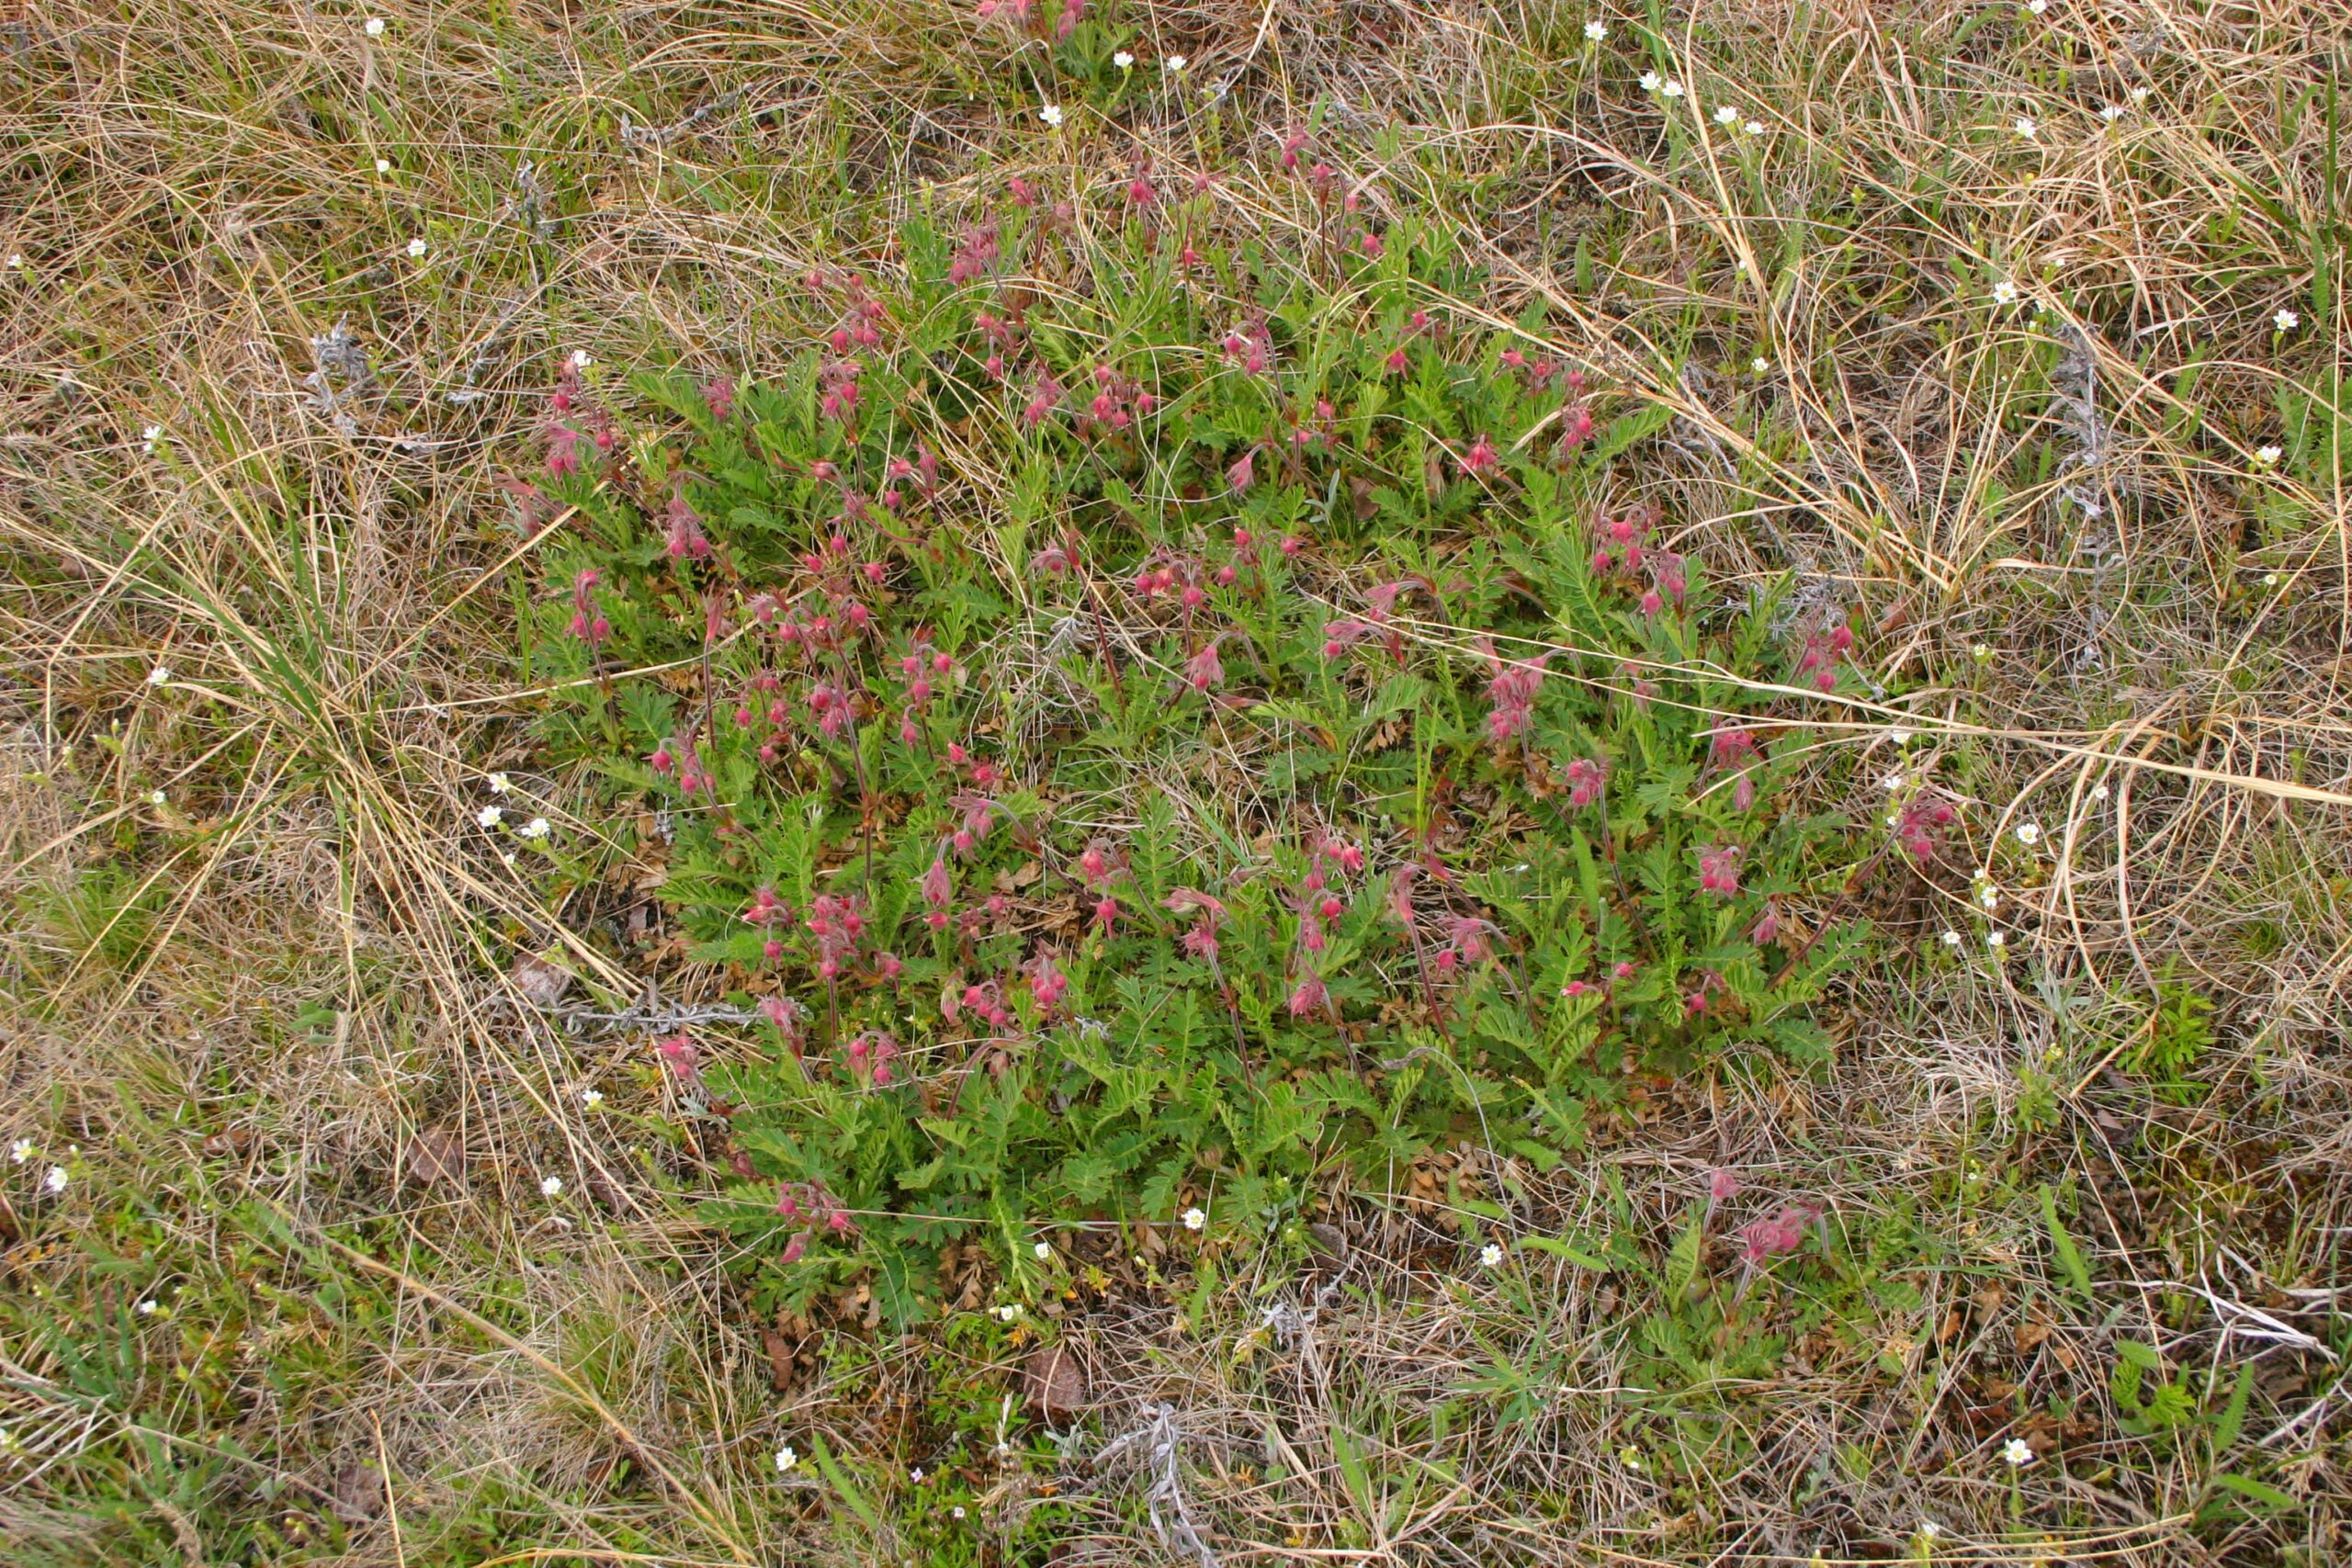 A low-growing plant with small bell-shaped pink flowers, with tiny white flowers growing at intervals near the edge.